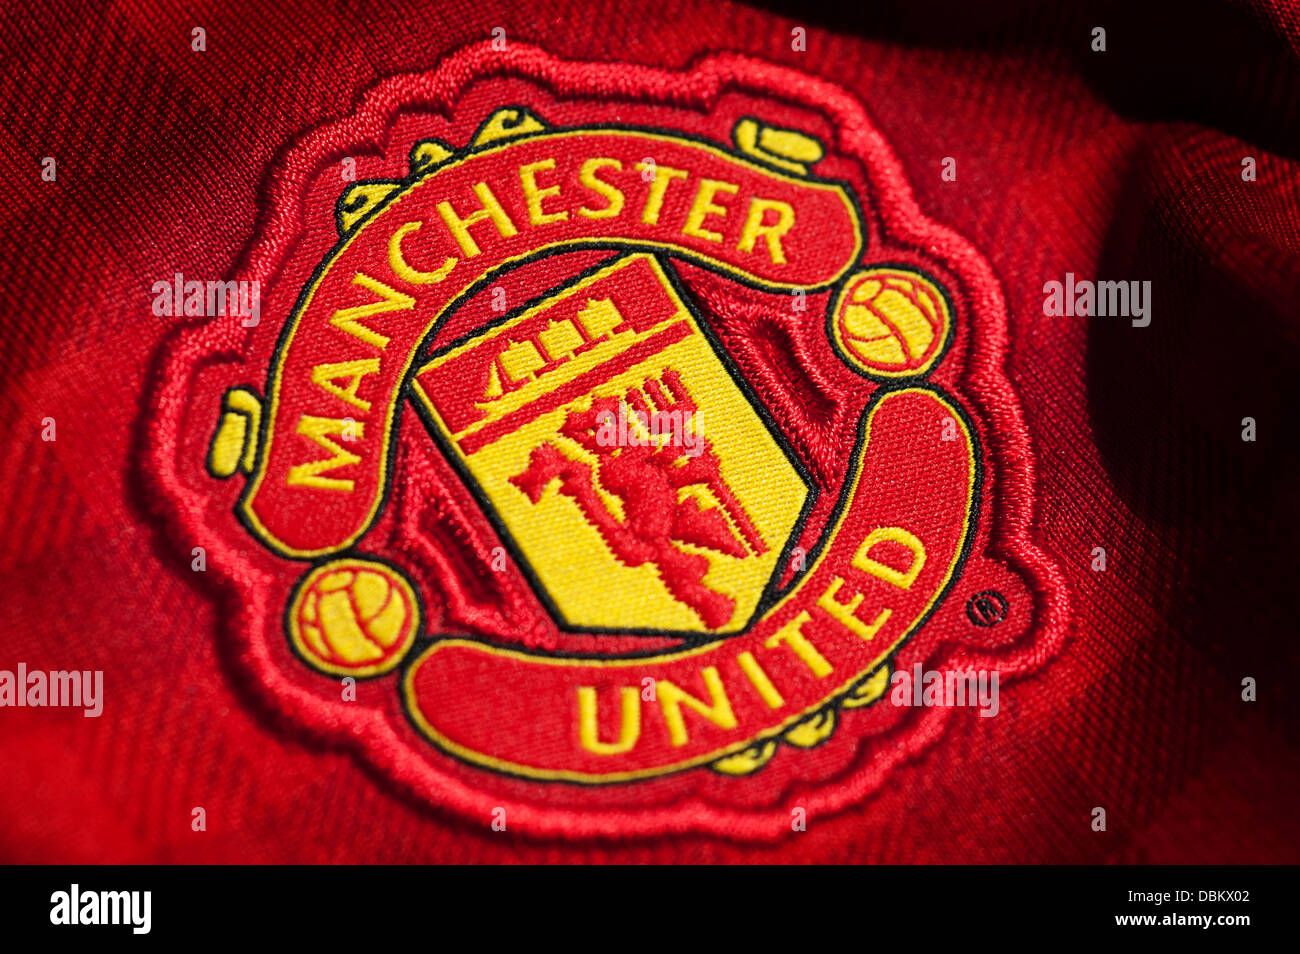 Manchester United Football Club Crest Stock Photo